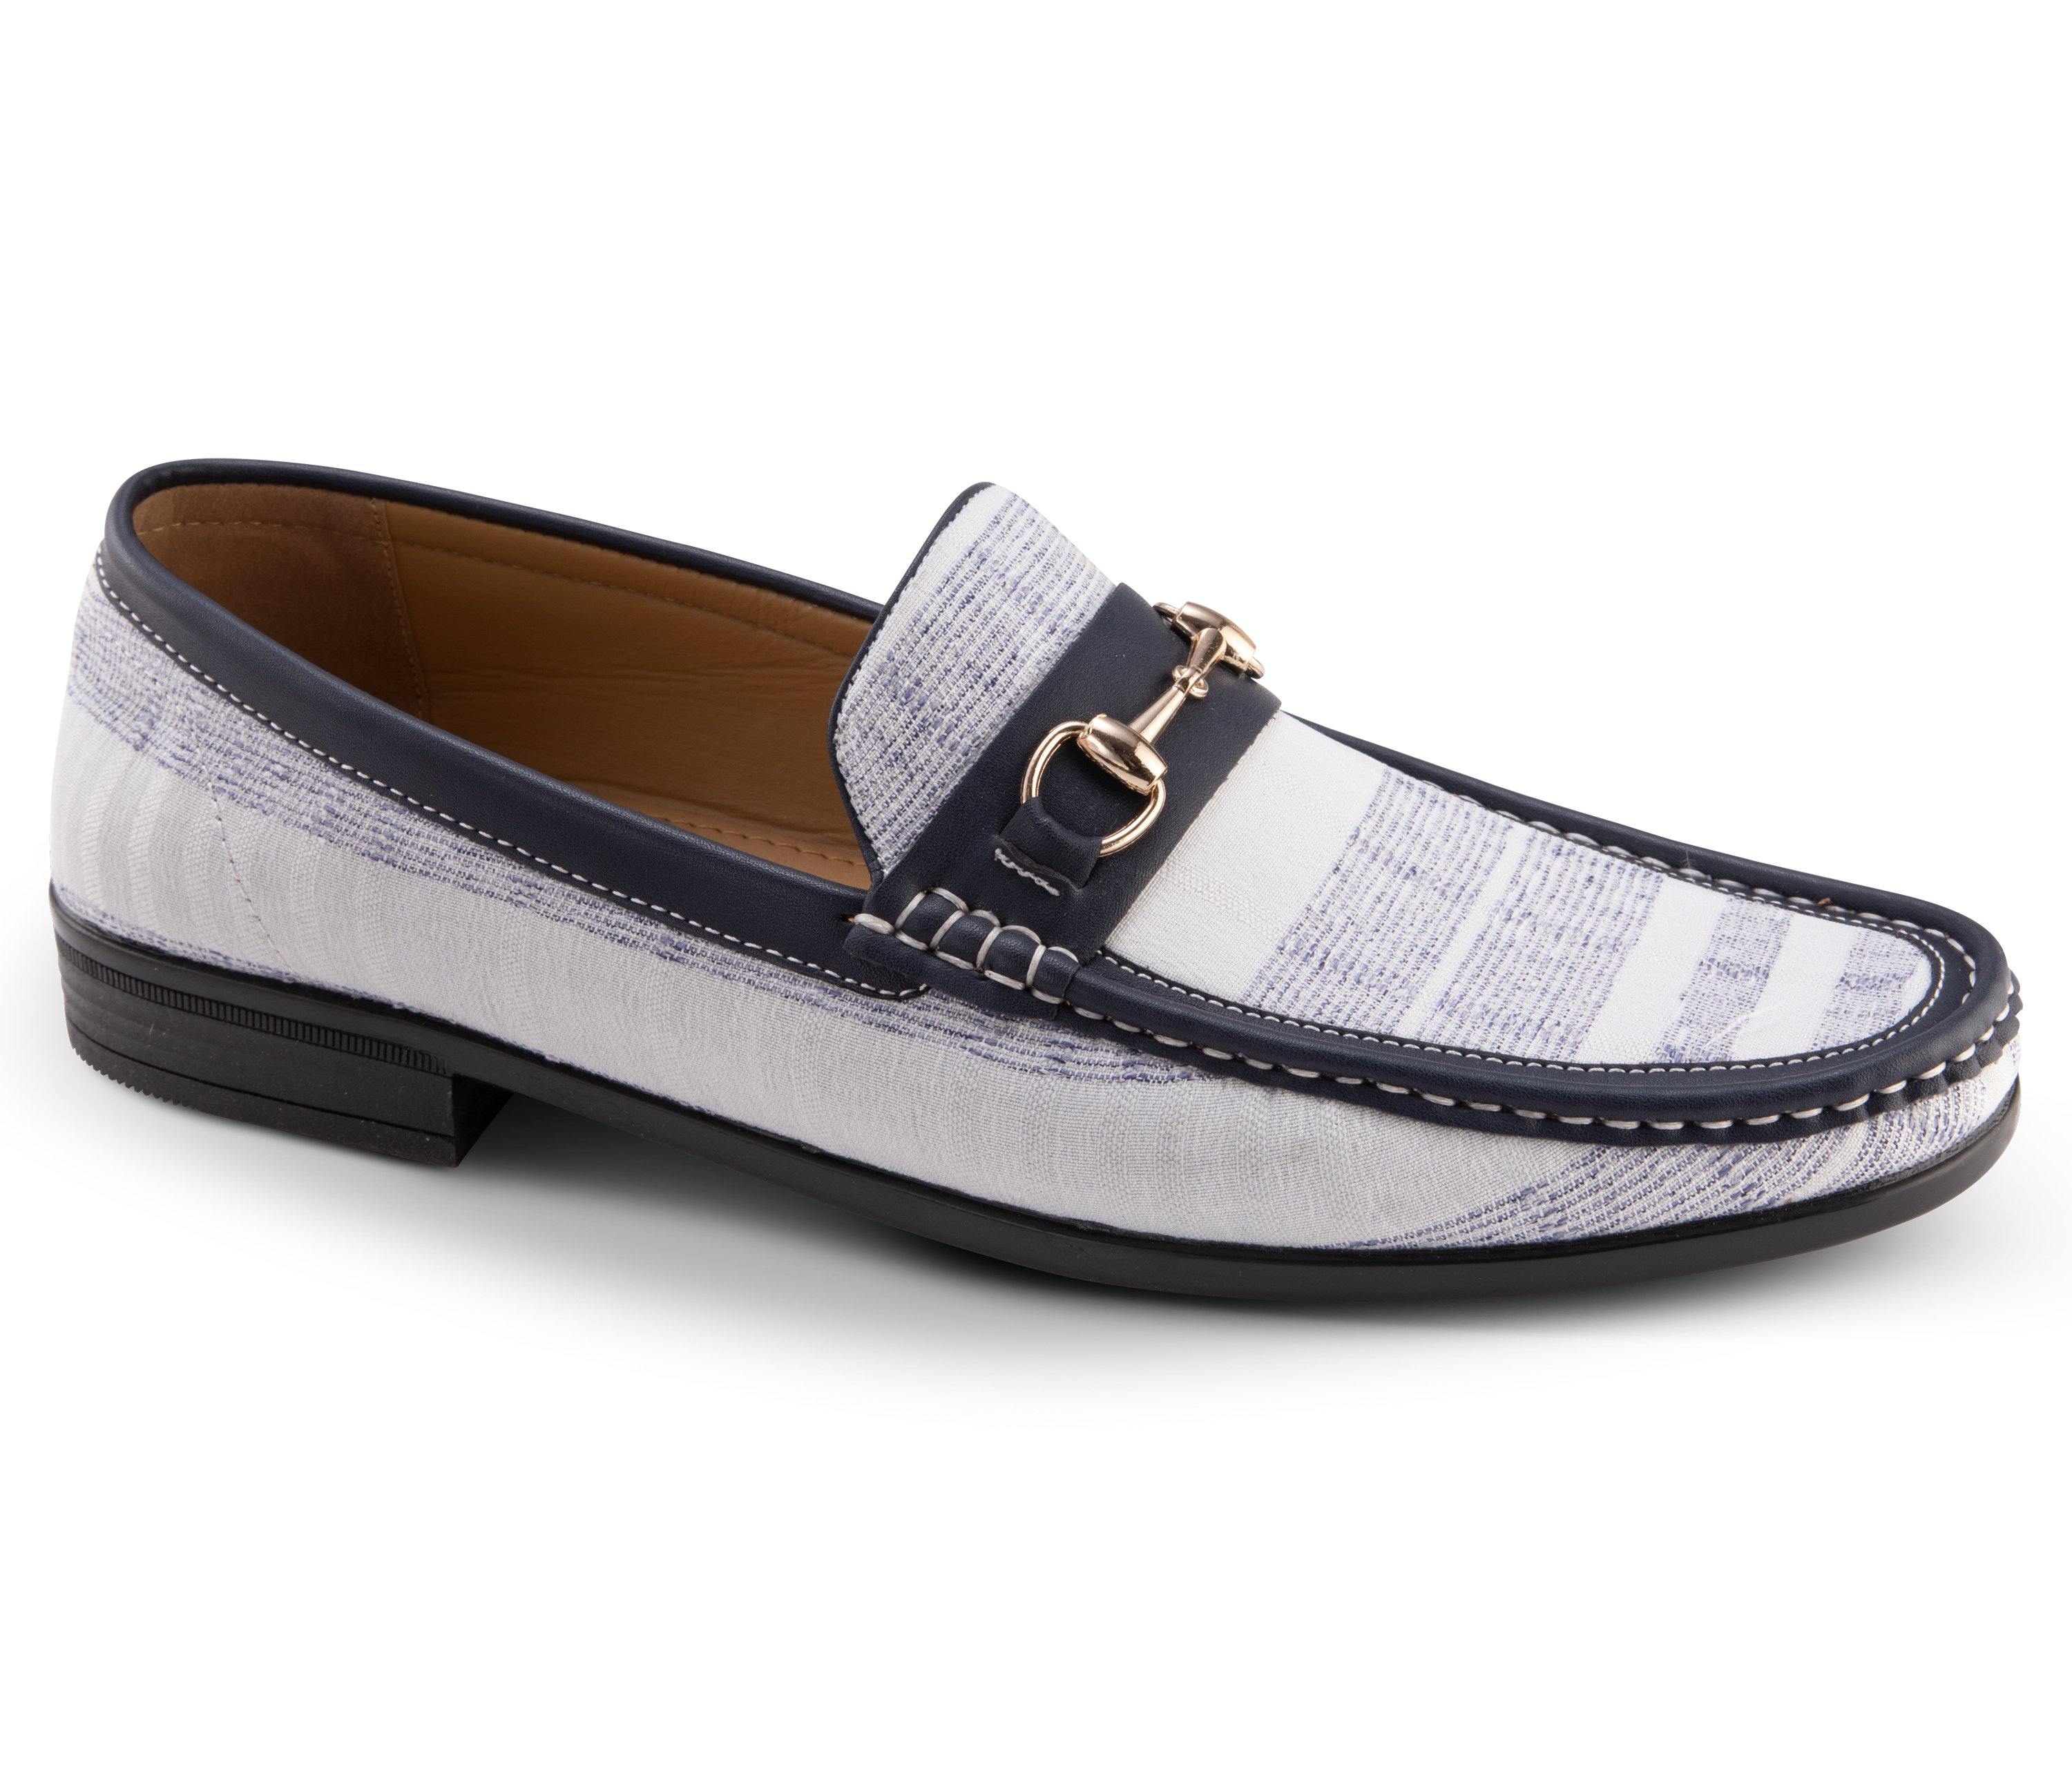 Men's Fashion Loafers Slip-On Shoes in Striped Navy Pattern - S2037 - Suits & More